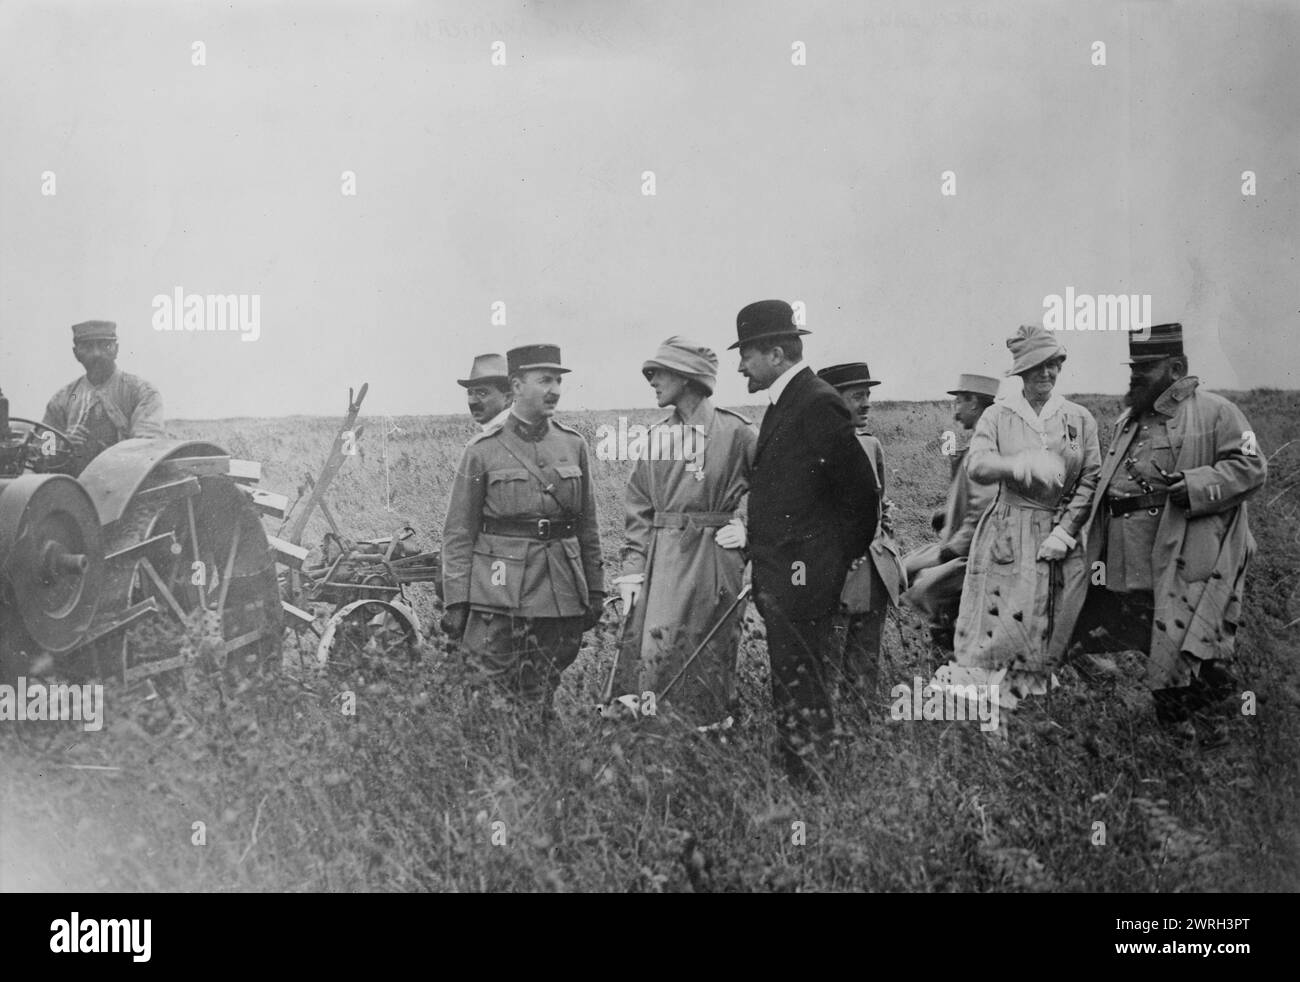 Mrs. Anna Dike &amp; Anne Morgan, between c1915 and 1918. Mrs. Anna Dike, Miss Anne Morgan and French politician Fernand David (1869-1935) inspecting land in France, plowed as part of the work of the American Fund for French Wounded during World War I. Stock Photo